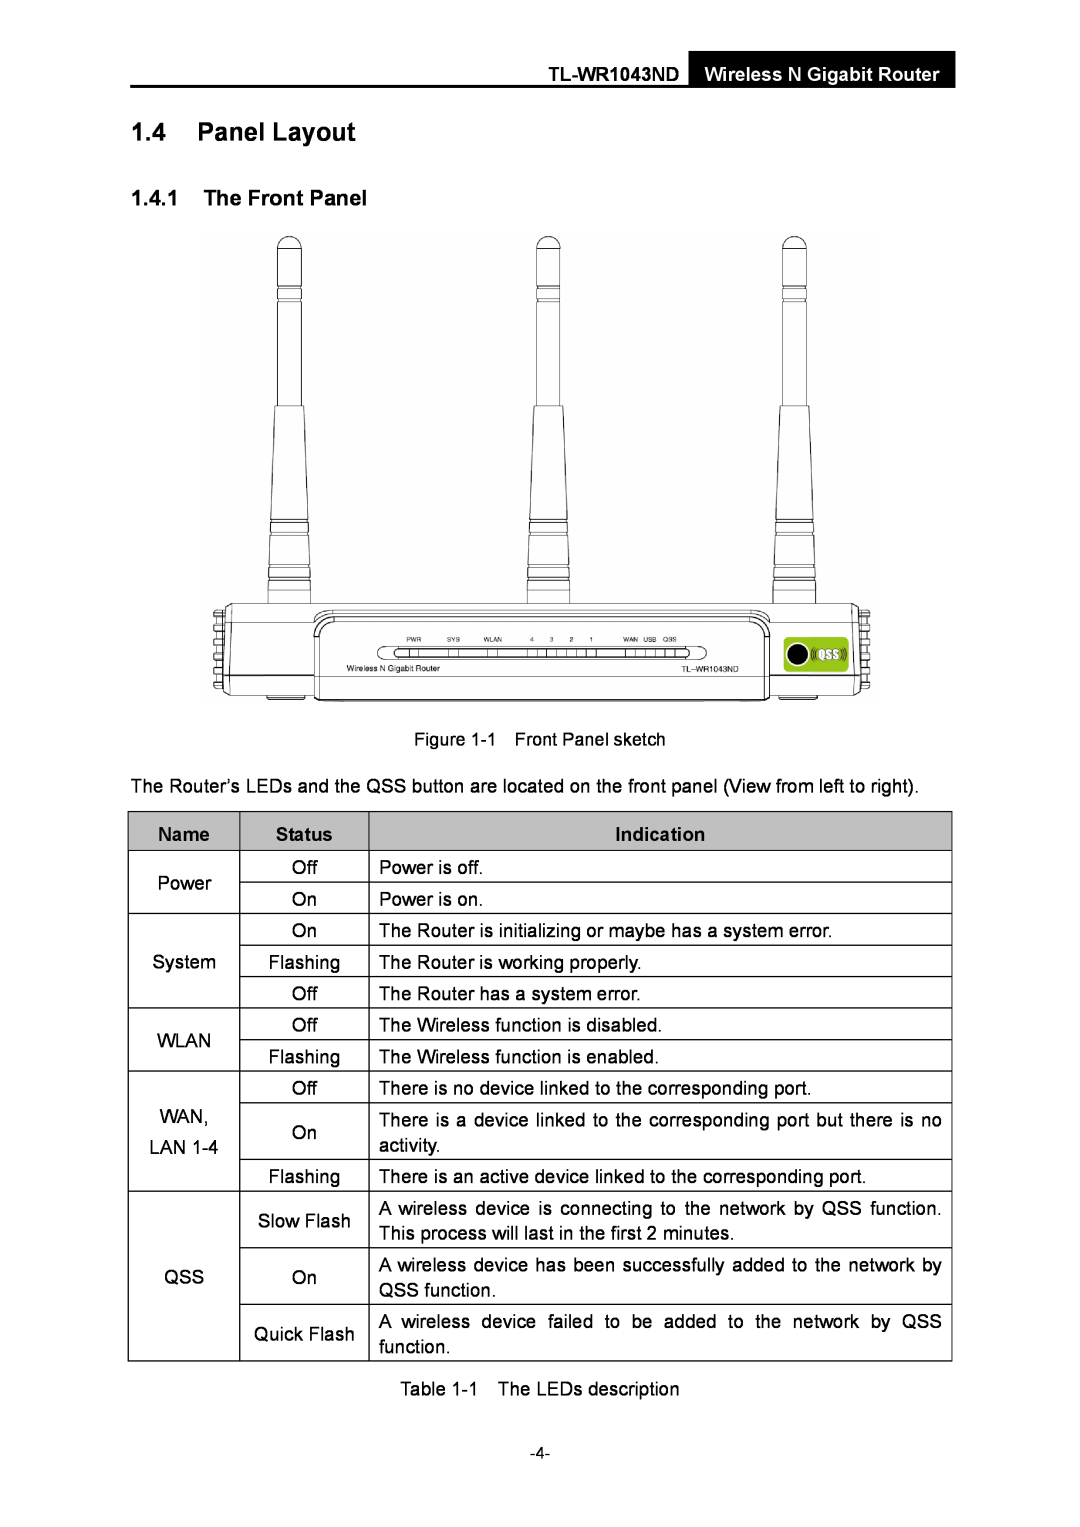 TP-Link manual Panel Layout, The Front Panel, Name, Status, Indication, TL-WR1043ND Wireless N Gigabit Router 